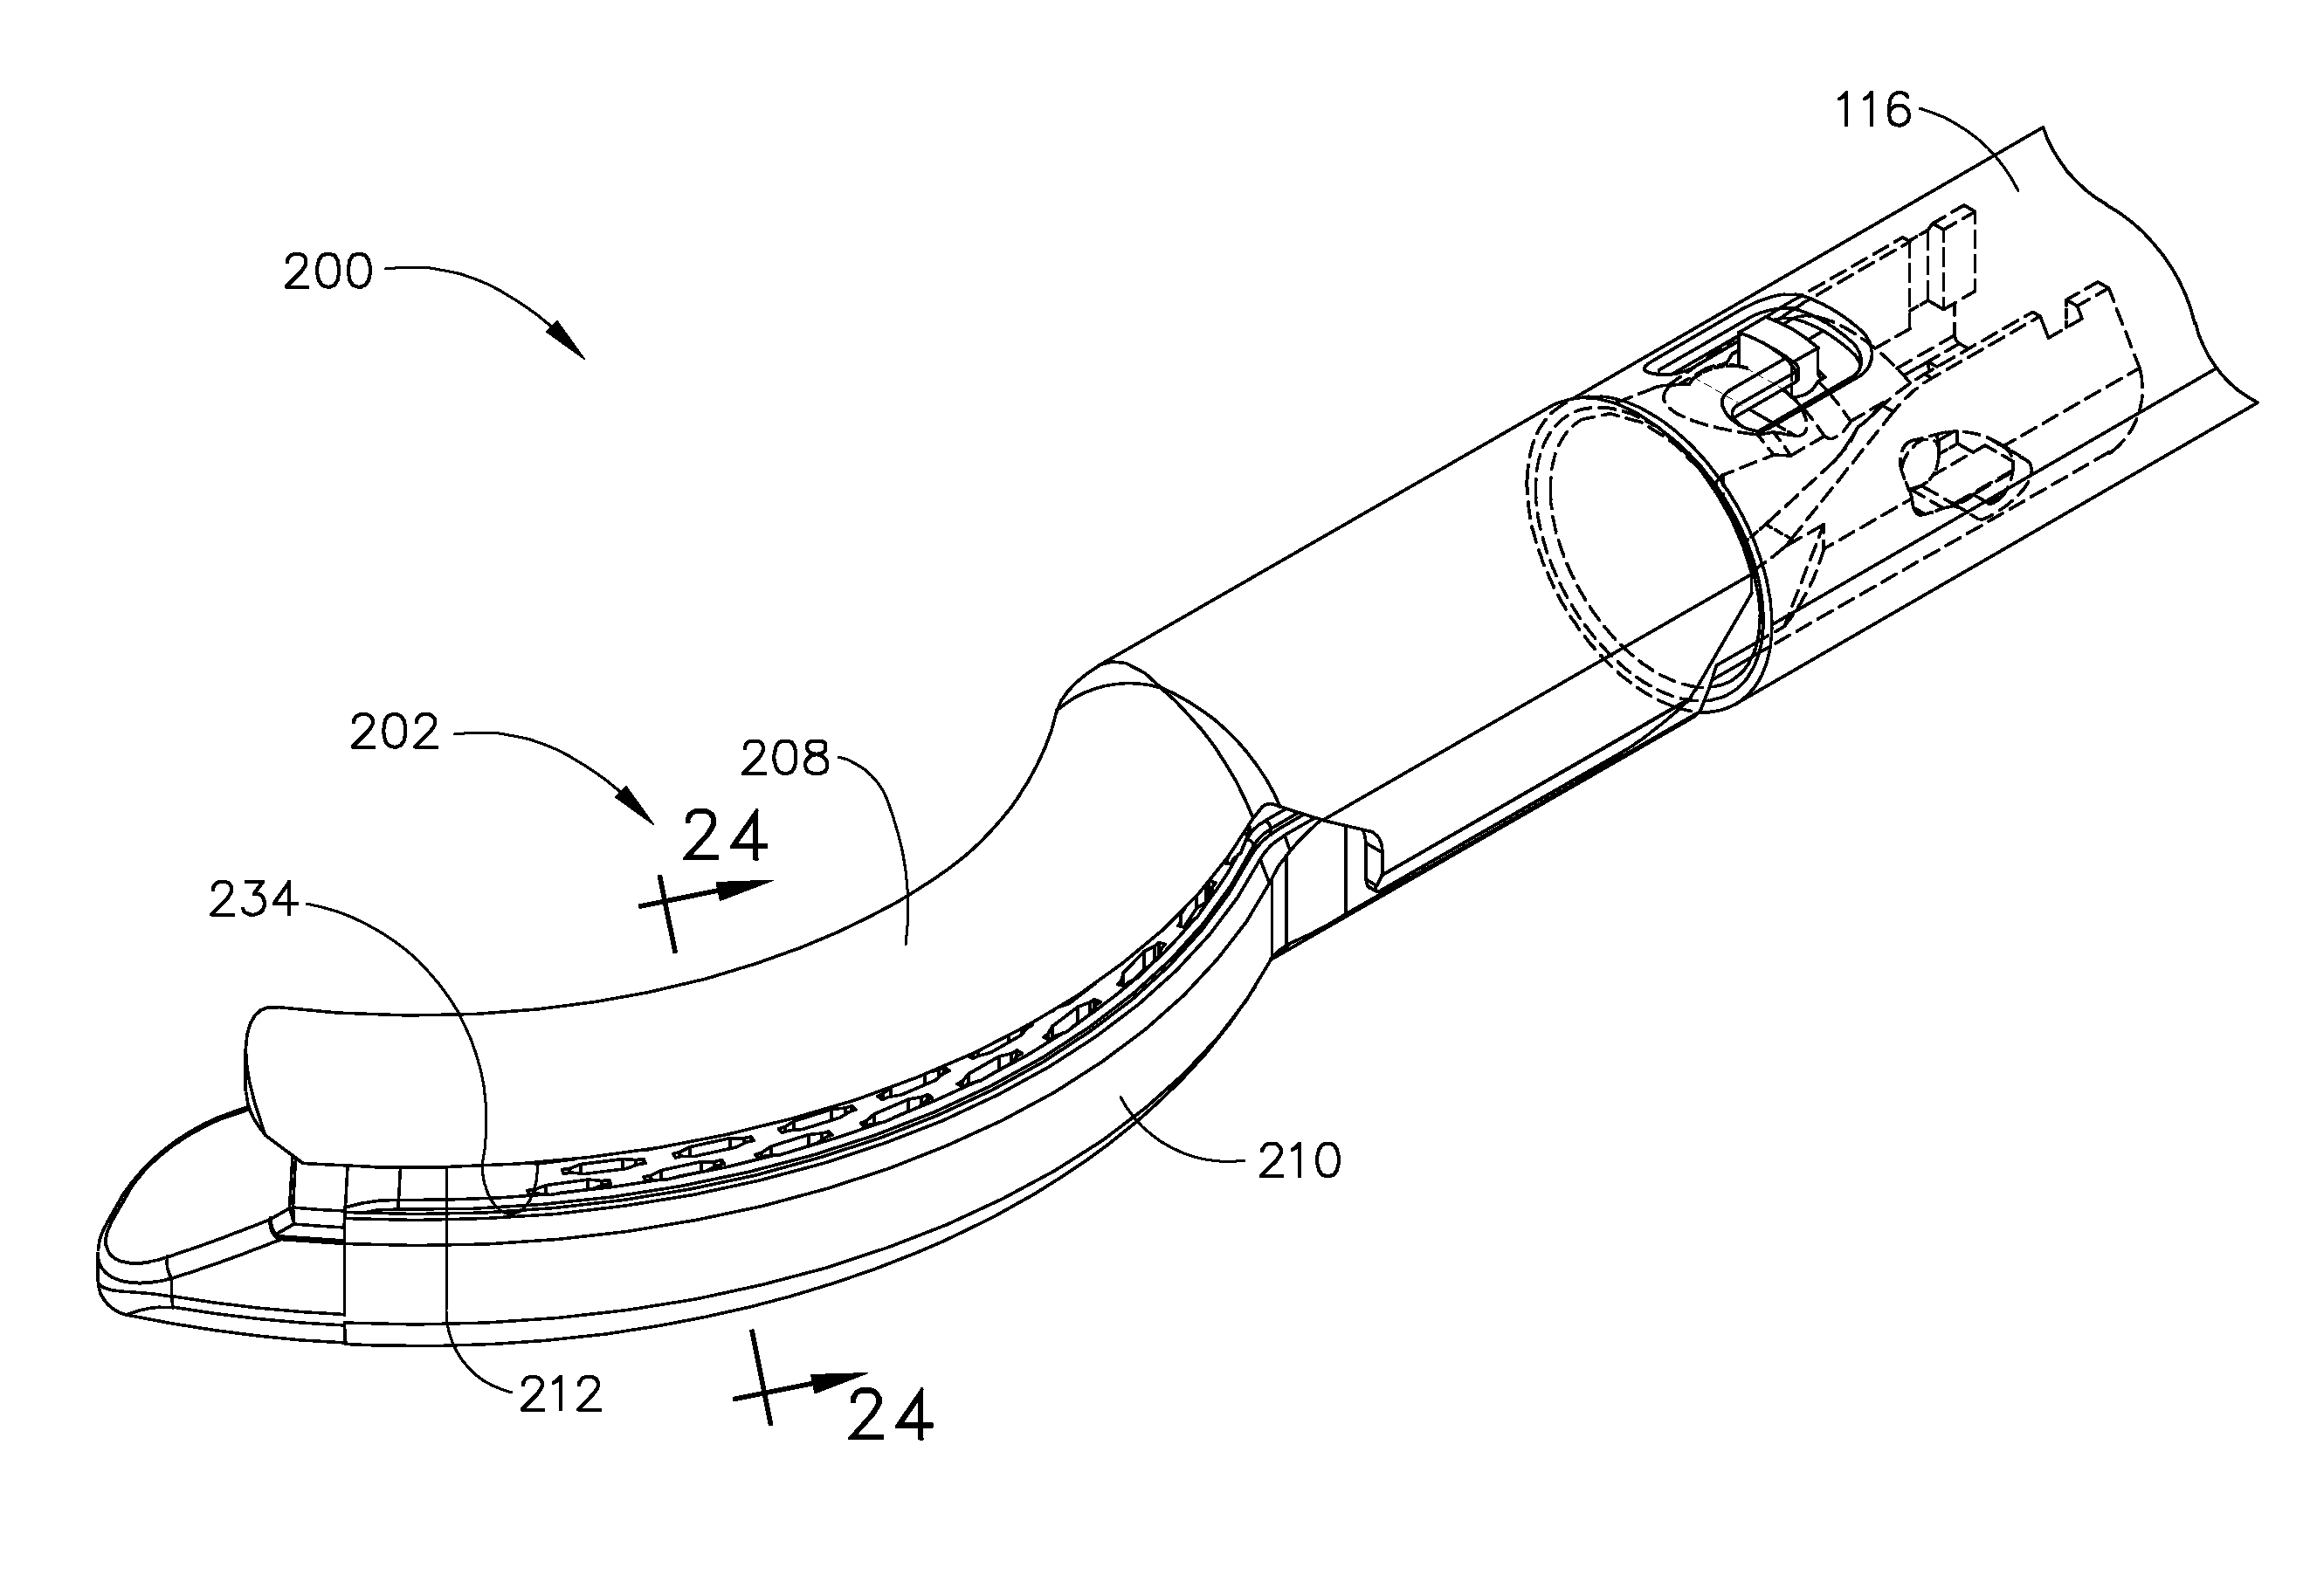 Apparatus for closing a curved anvil of a surgical stapling device